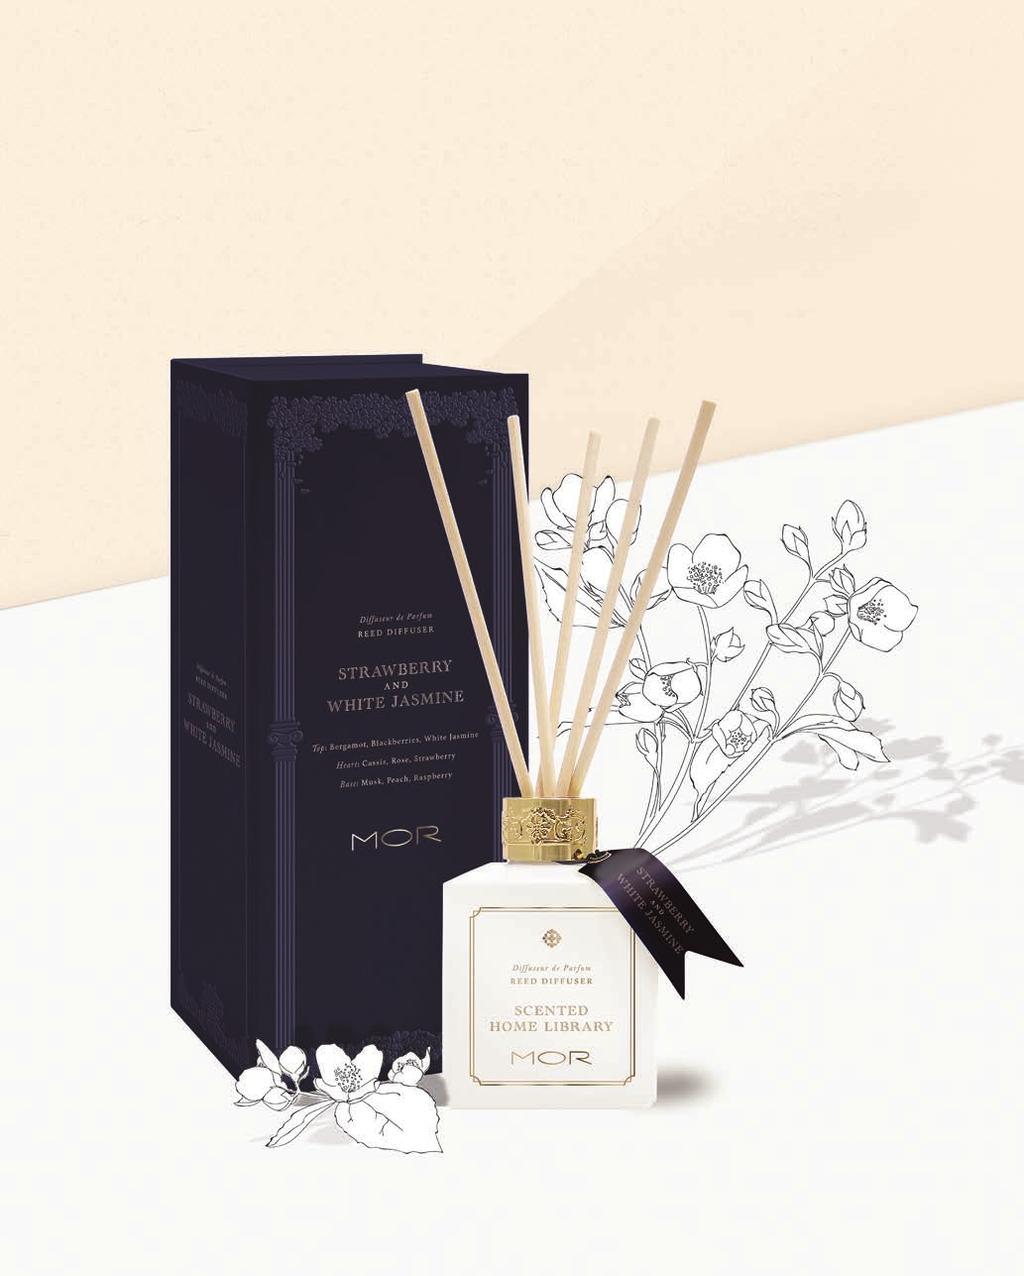 SCENTED HOME LIBRARY new Reed Diffusers Delight and ignite your senses with a trove of spellbinding scents.